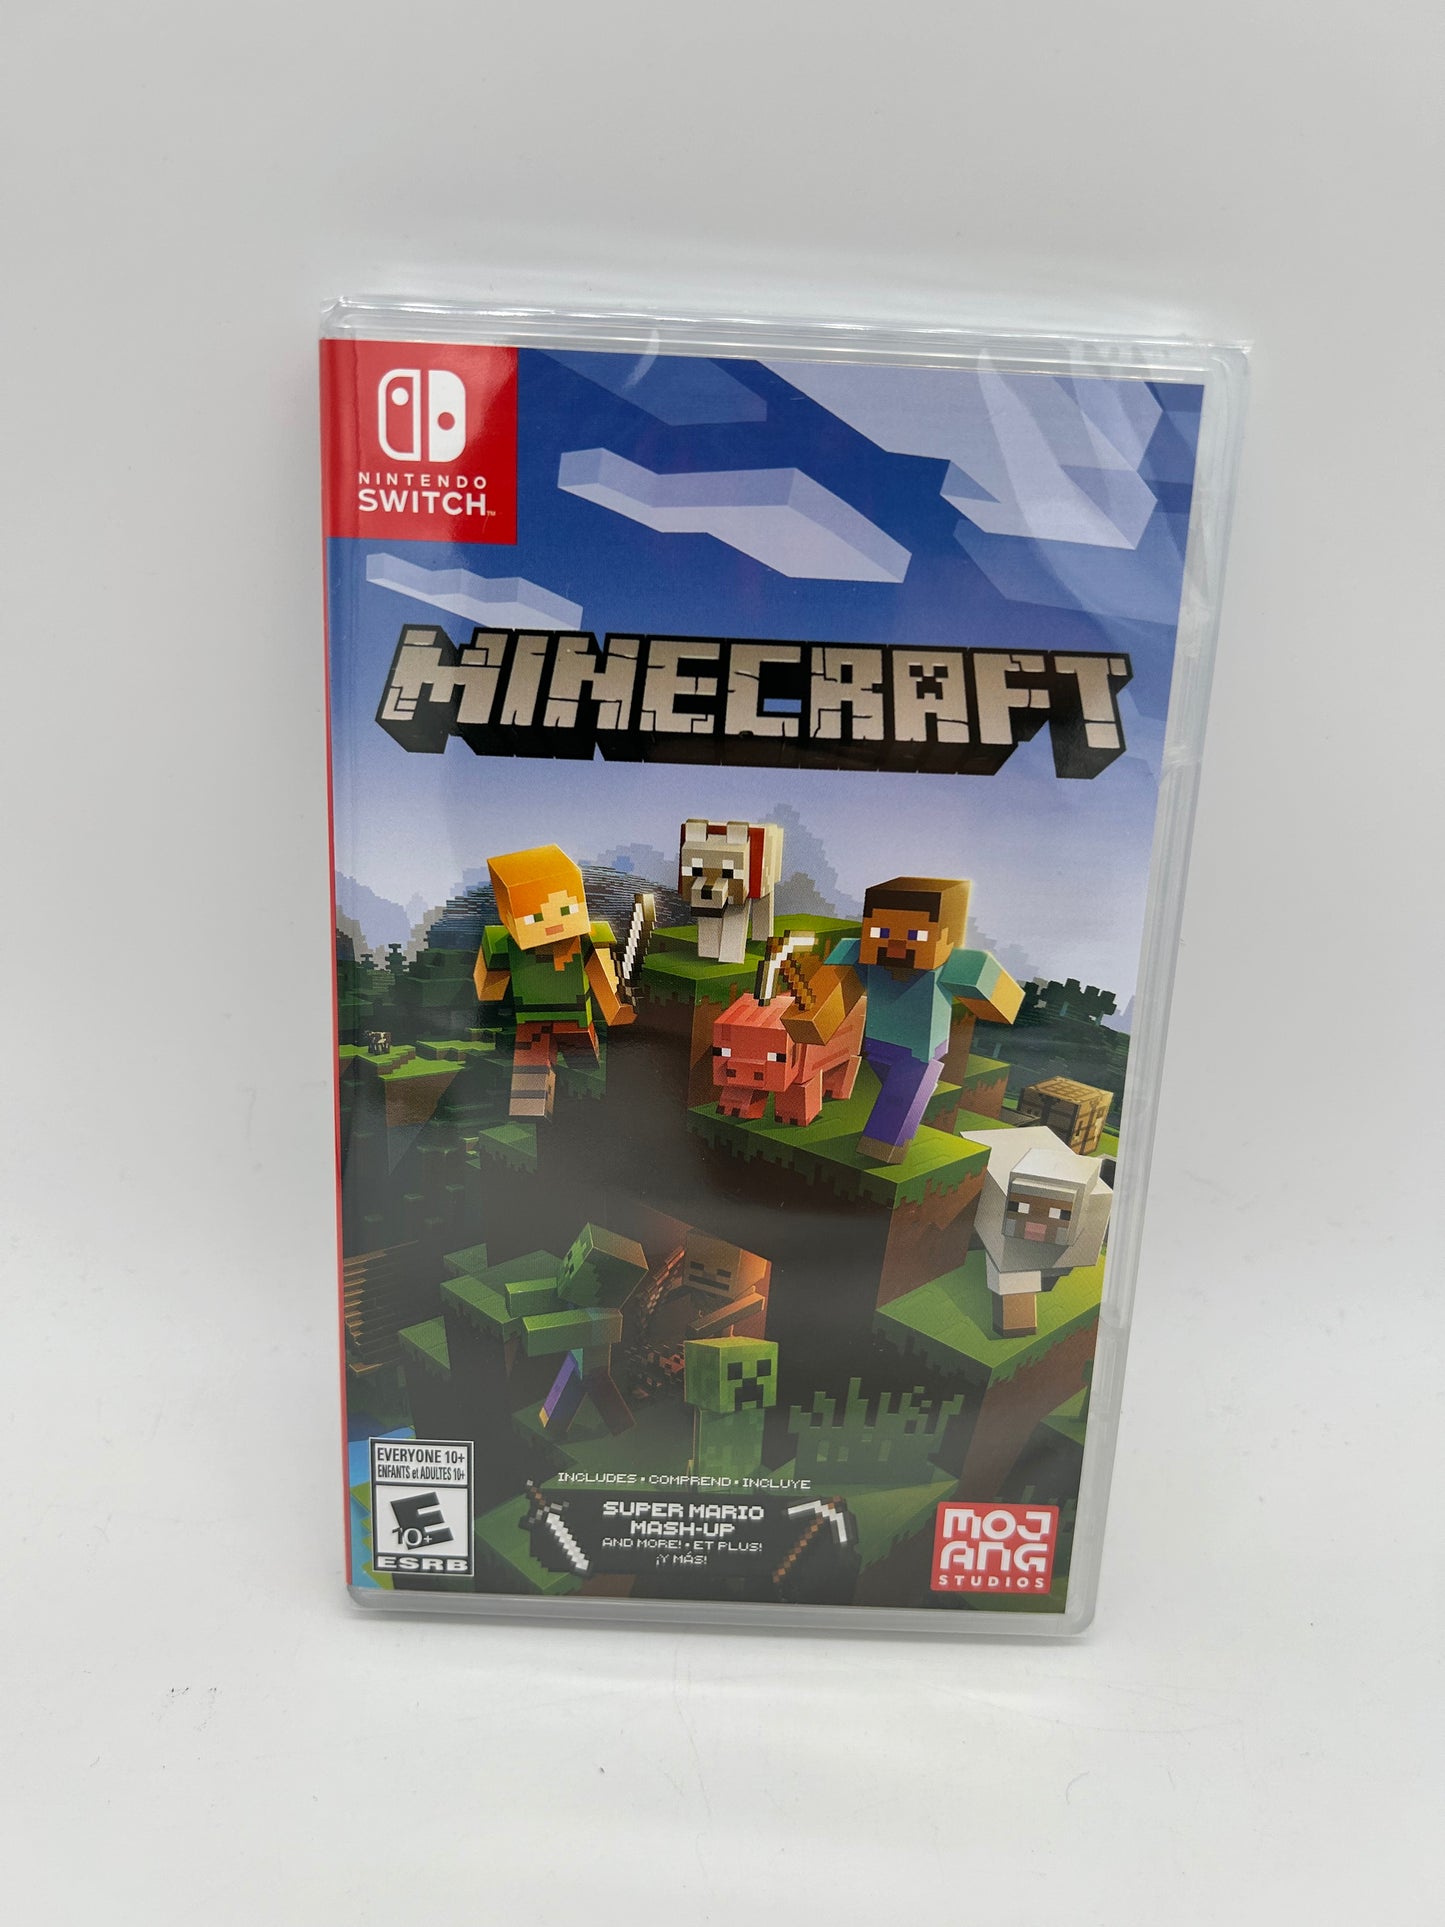 PiXEL-RETRO.COM : NINTENDO SWITCH NEW SEALED IN BOX COMPLETE MANUAL GAME NTSC MINECRAFT